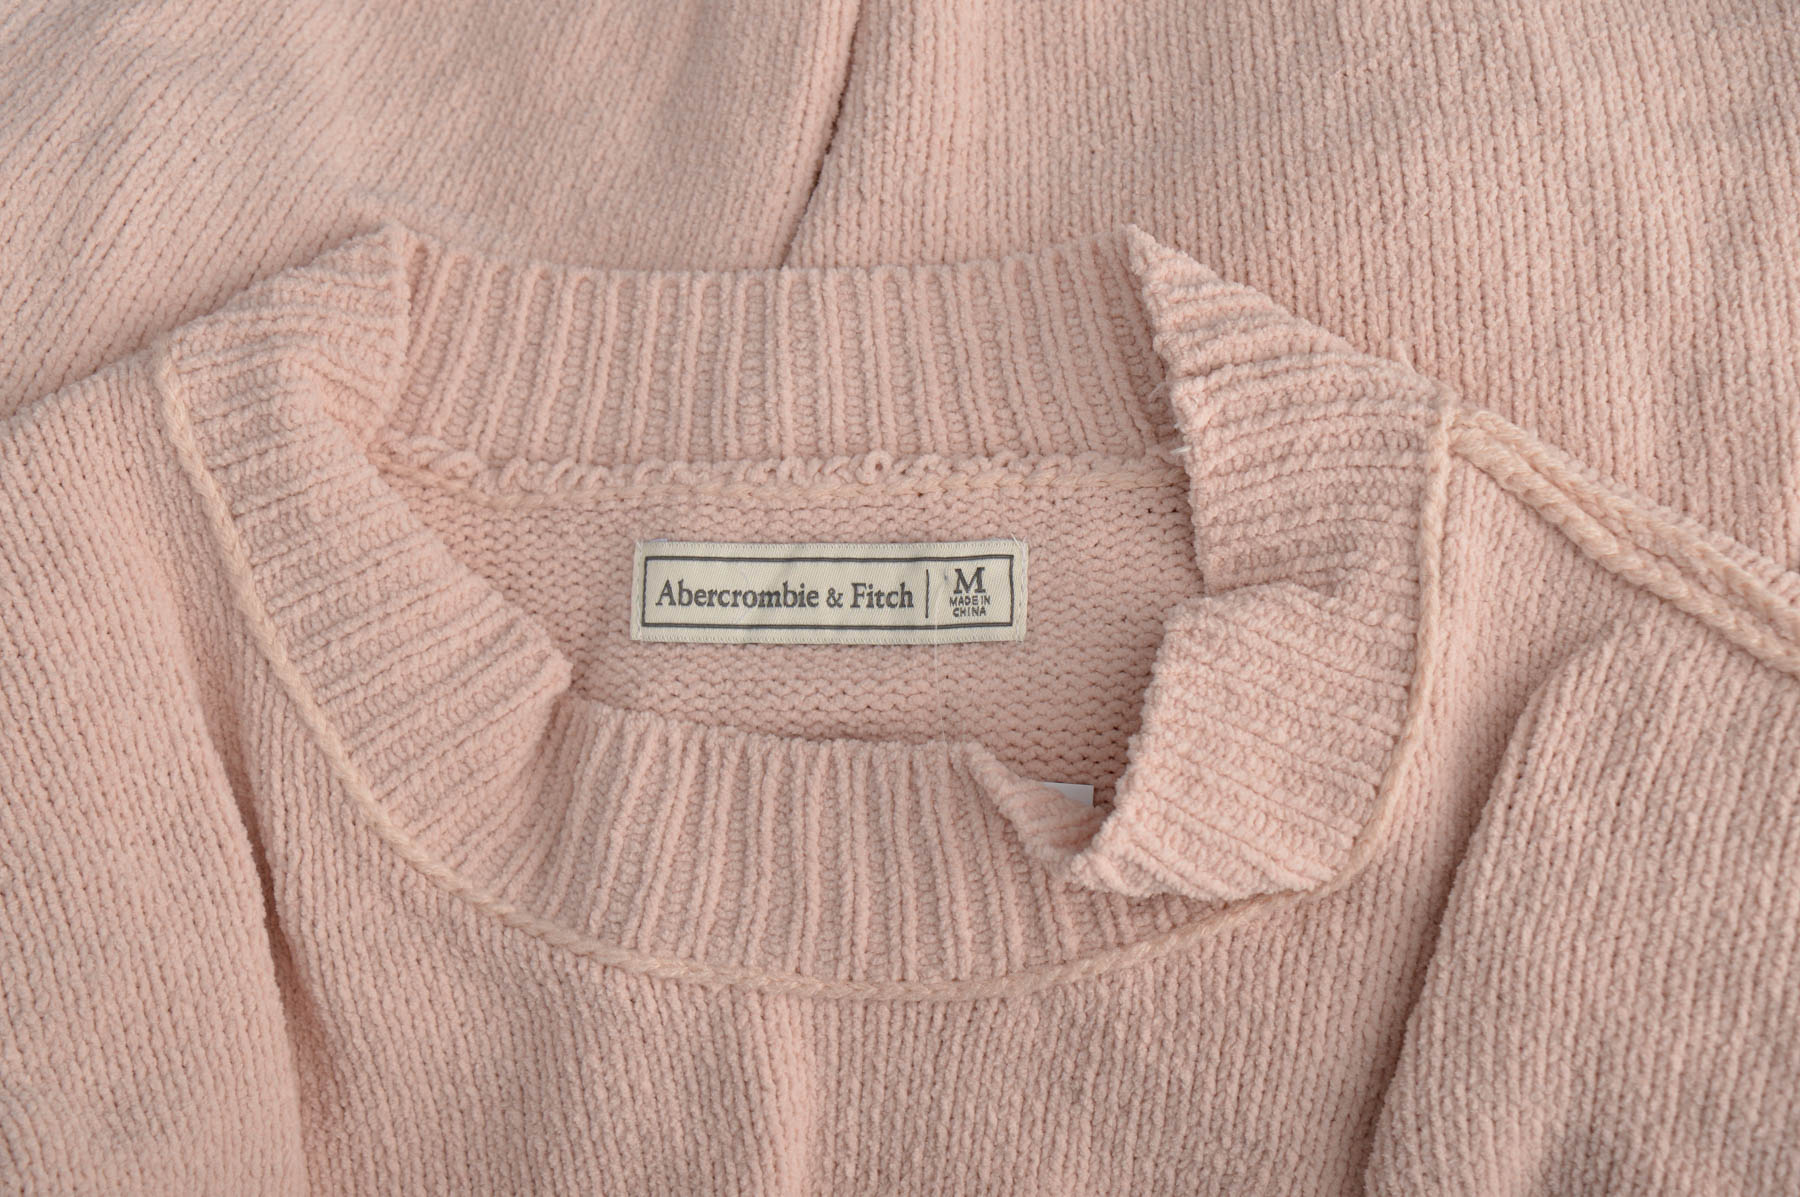 Women's sweater - Abercrombie & Fitch - 2